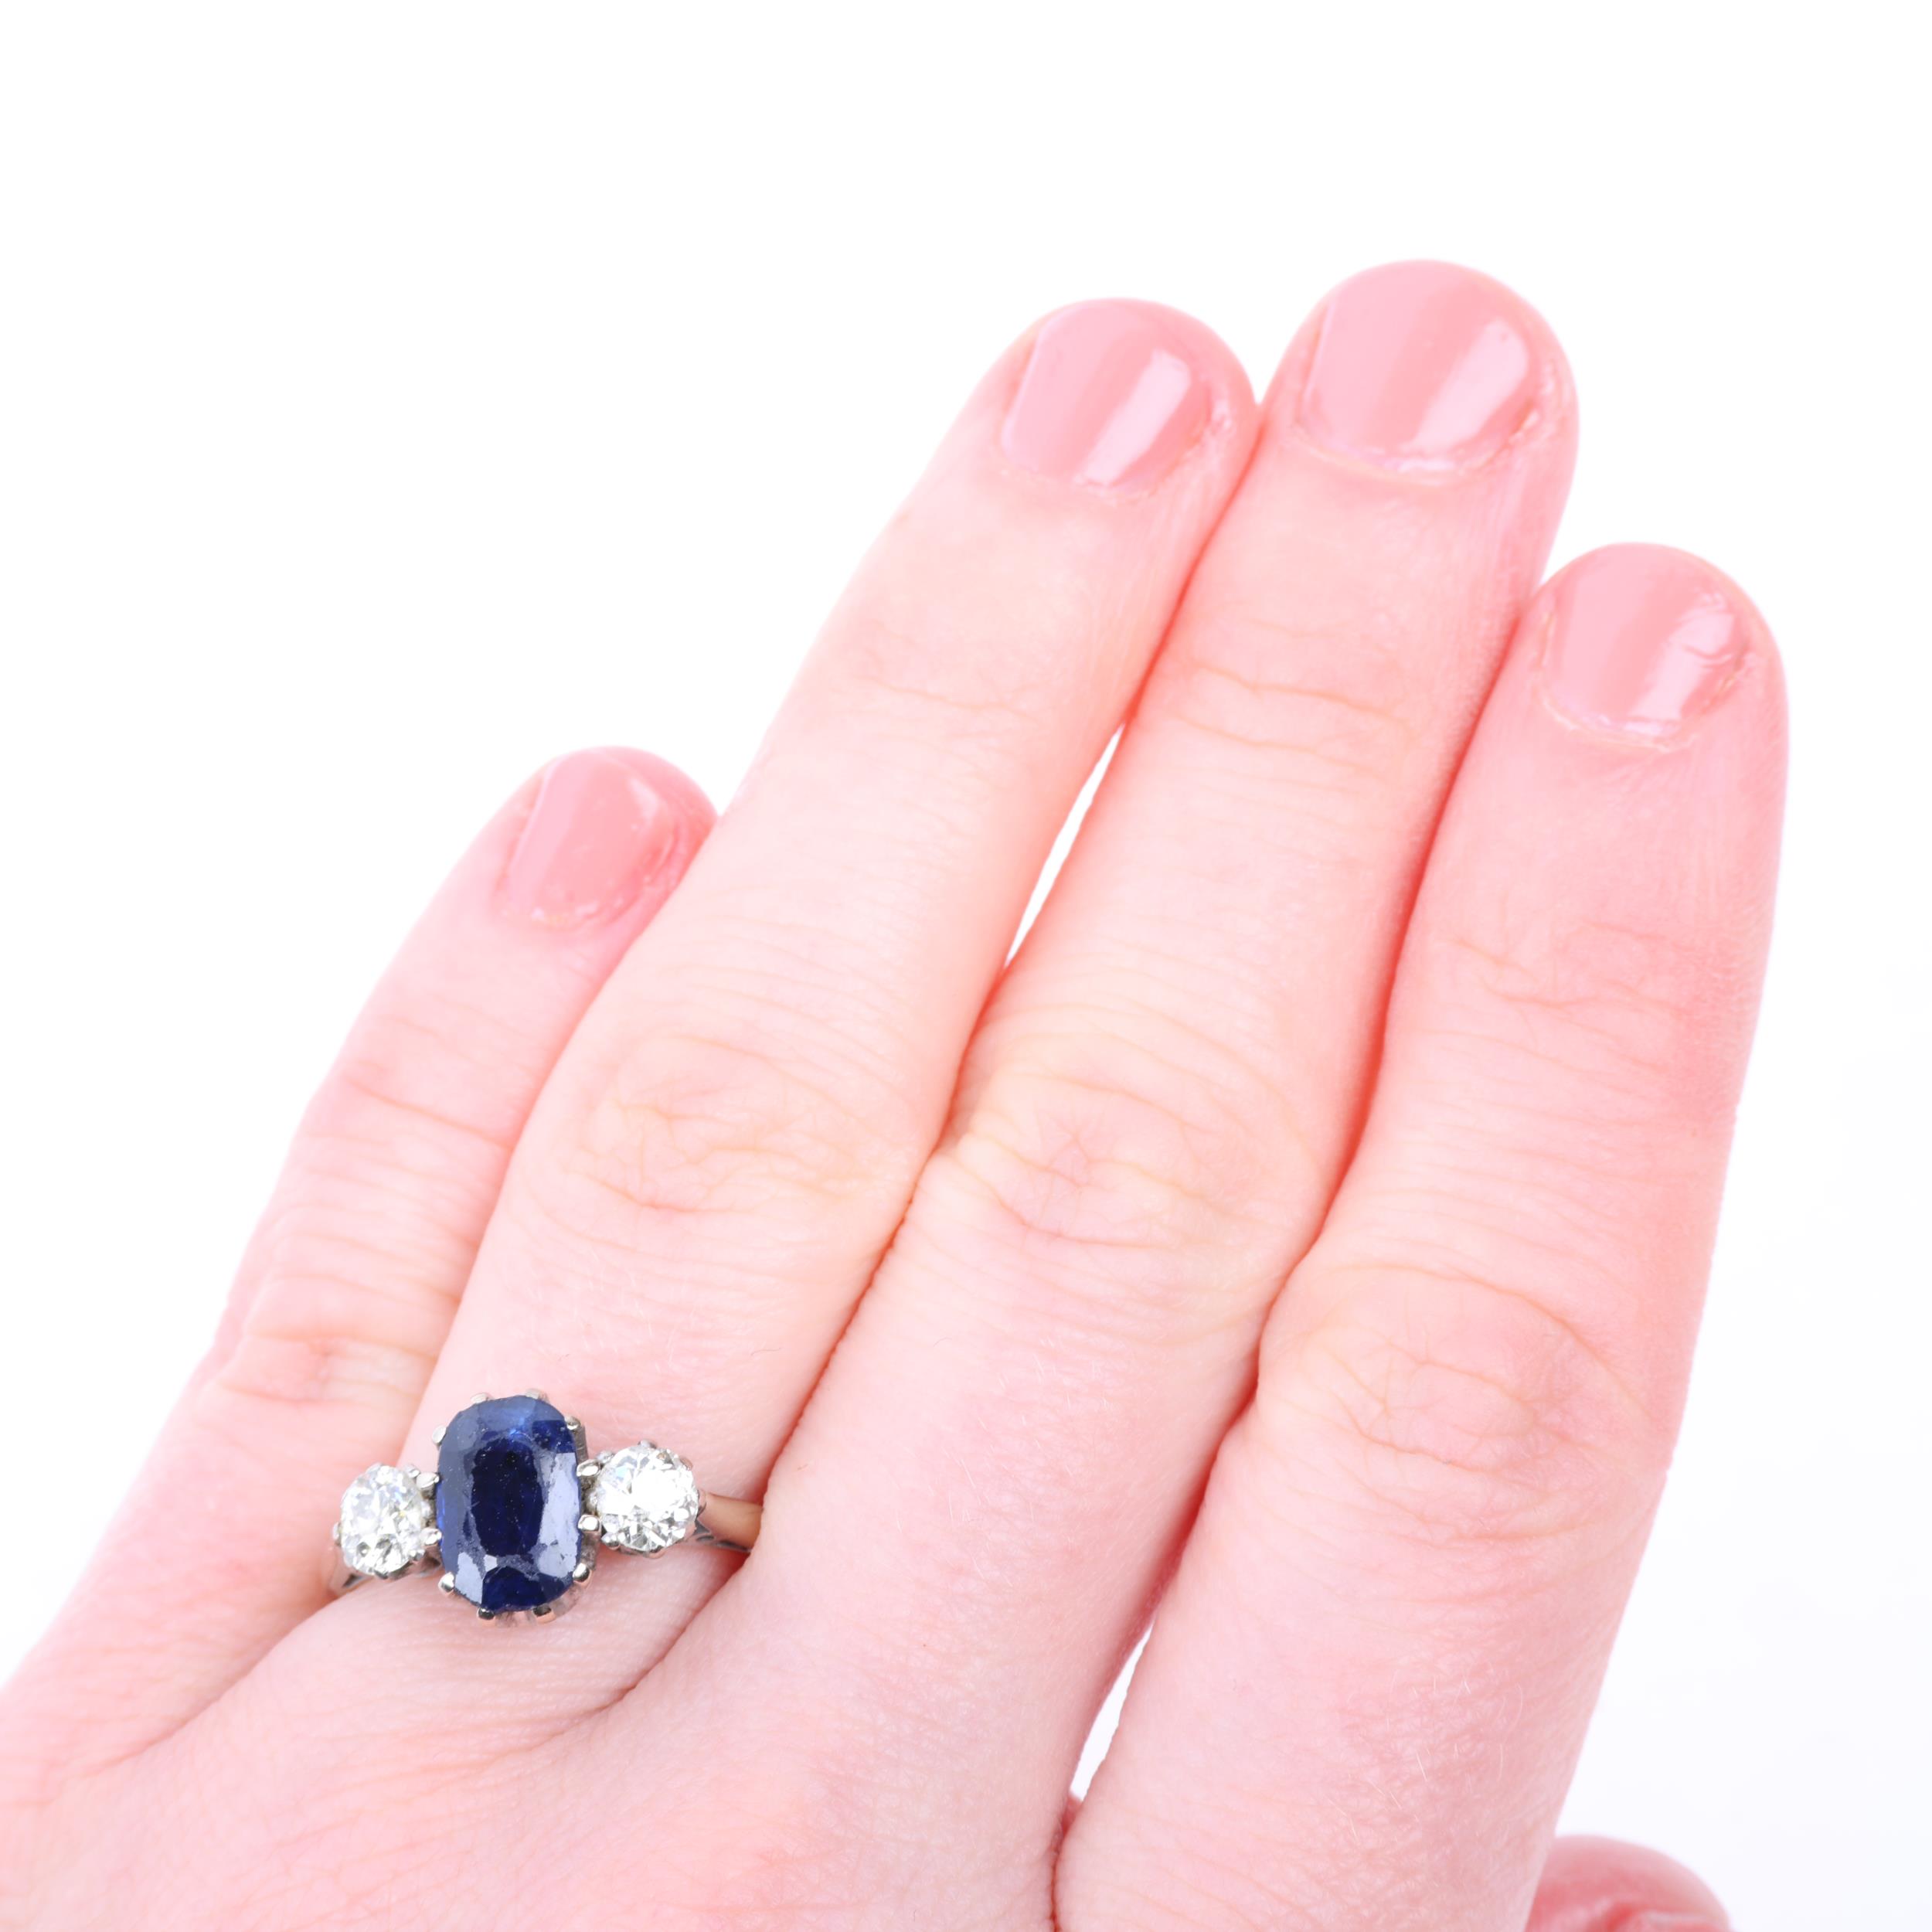 An 18ct white gold three stone sapphire and diamond ring, claw set with 1.7ct oval mixed-cut - Image 4 of 4